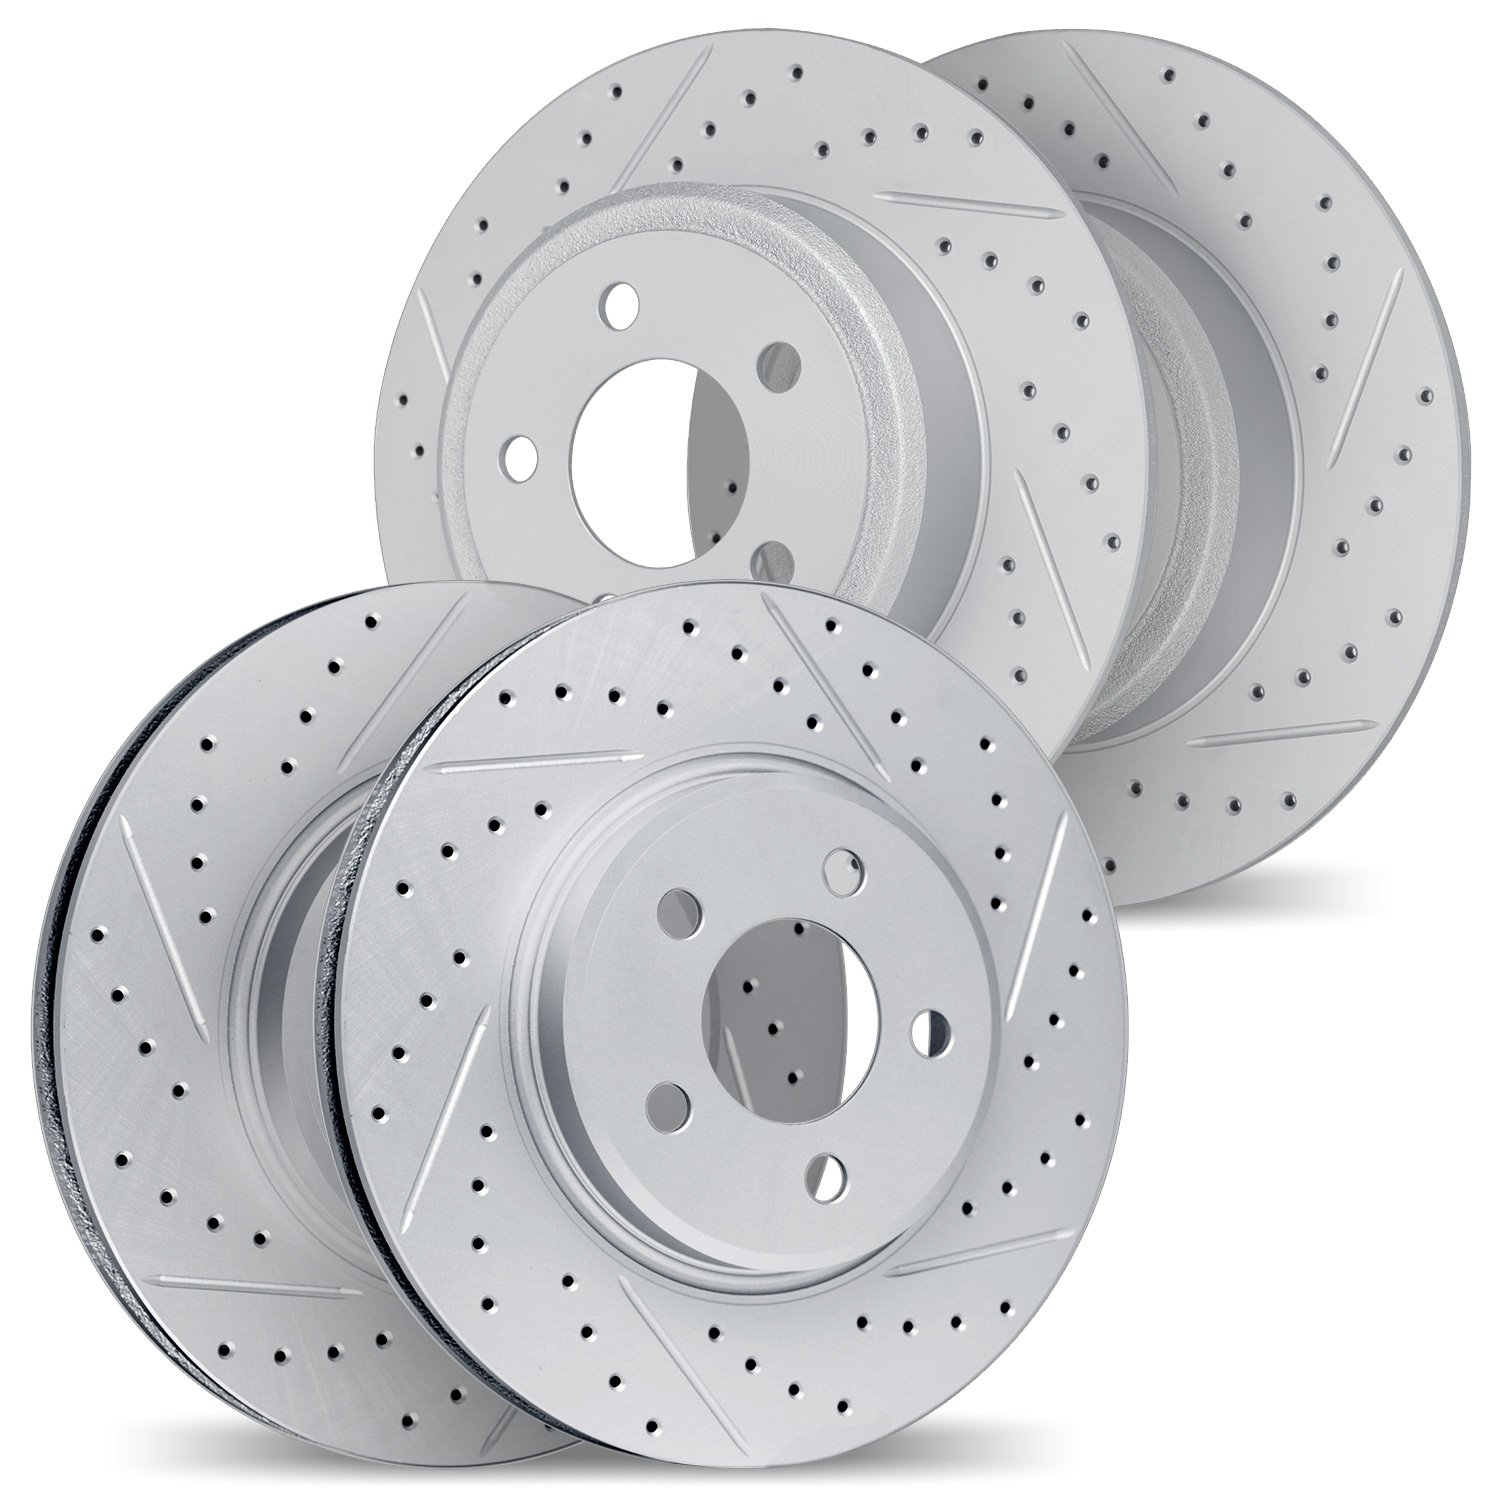 2004-27009 Geoperformance Drilled/Slotted Brake Rotors, 1998-2004 Volvo, Position: Front and Rear